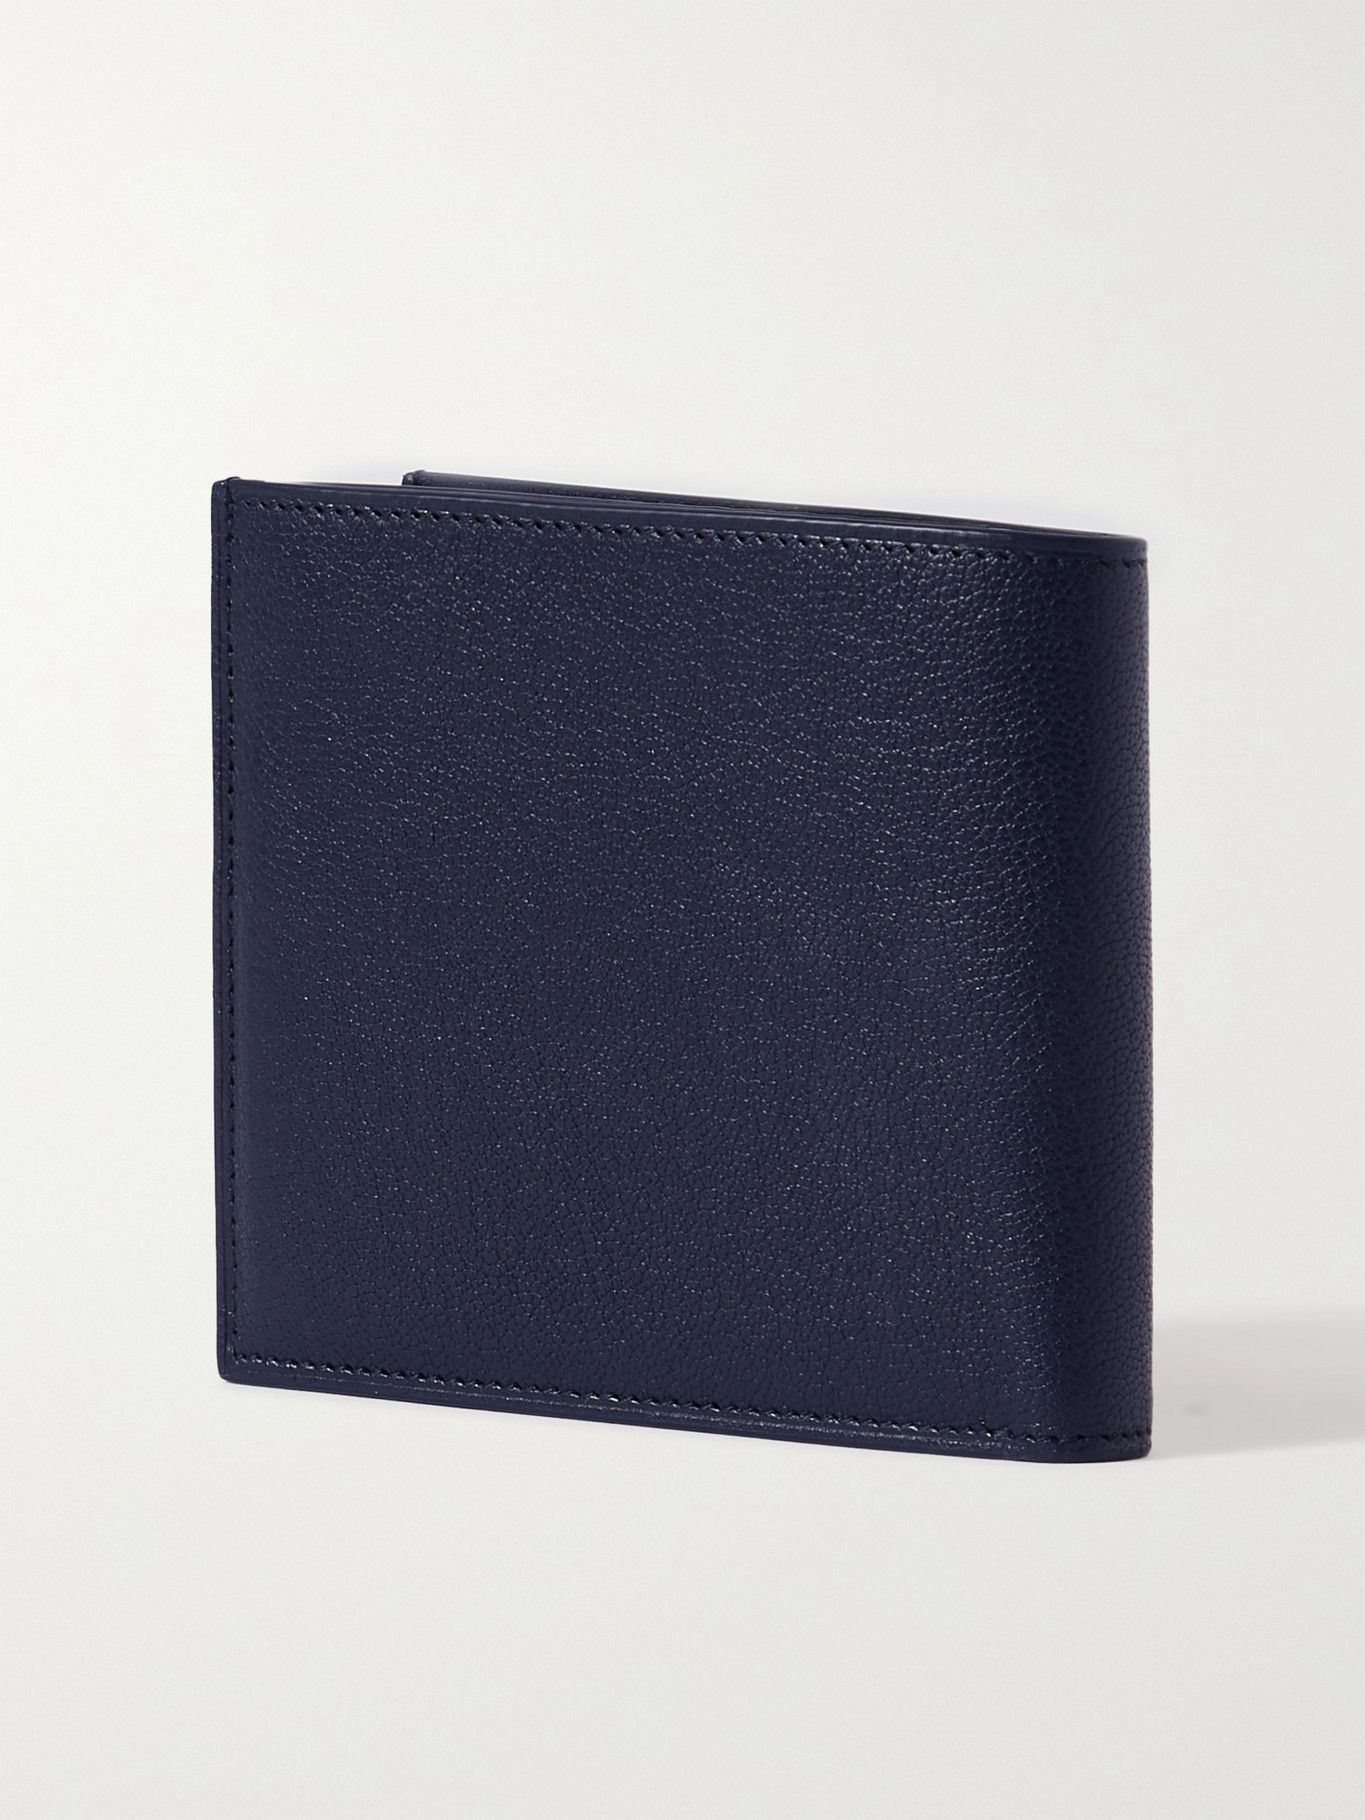 DUNHILL - Full-Grain Leather Bifold Wallet Dunhill